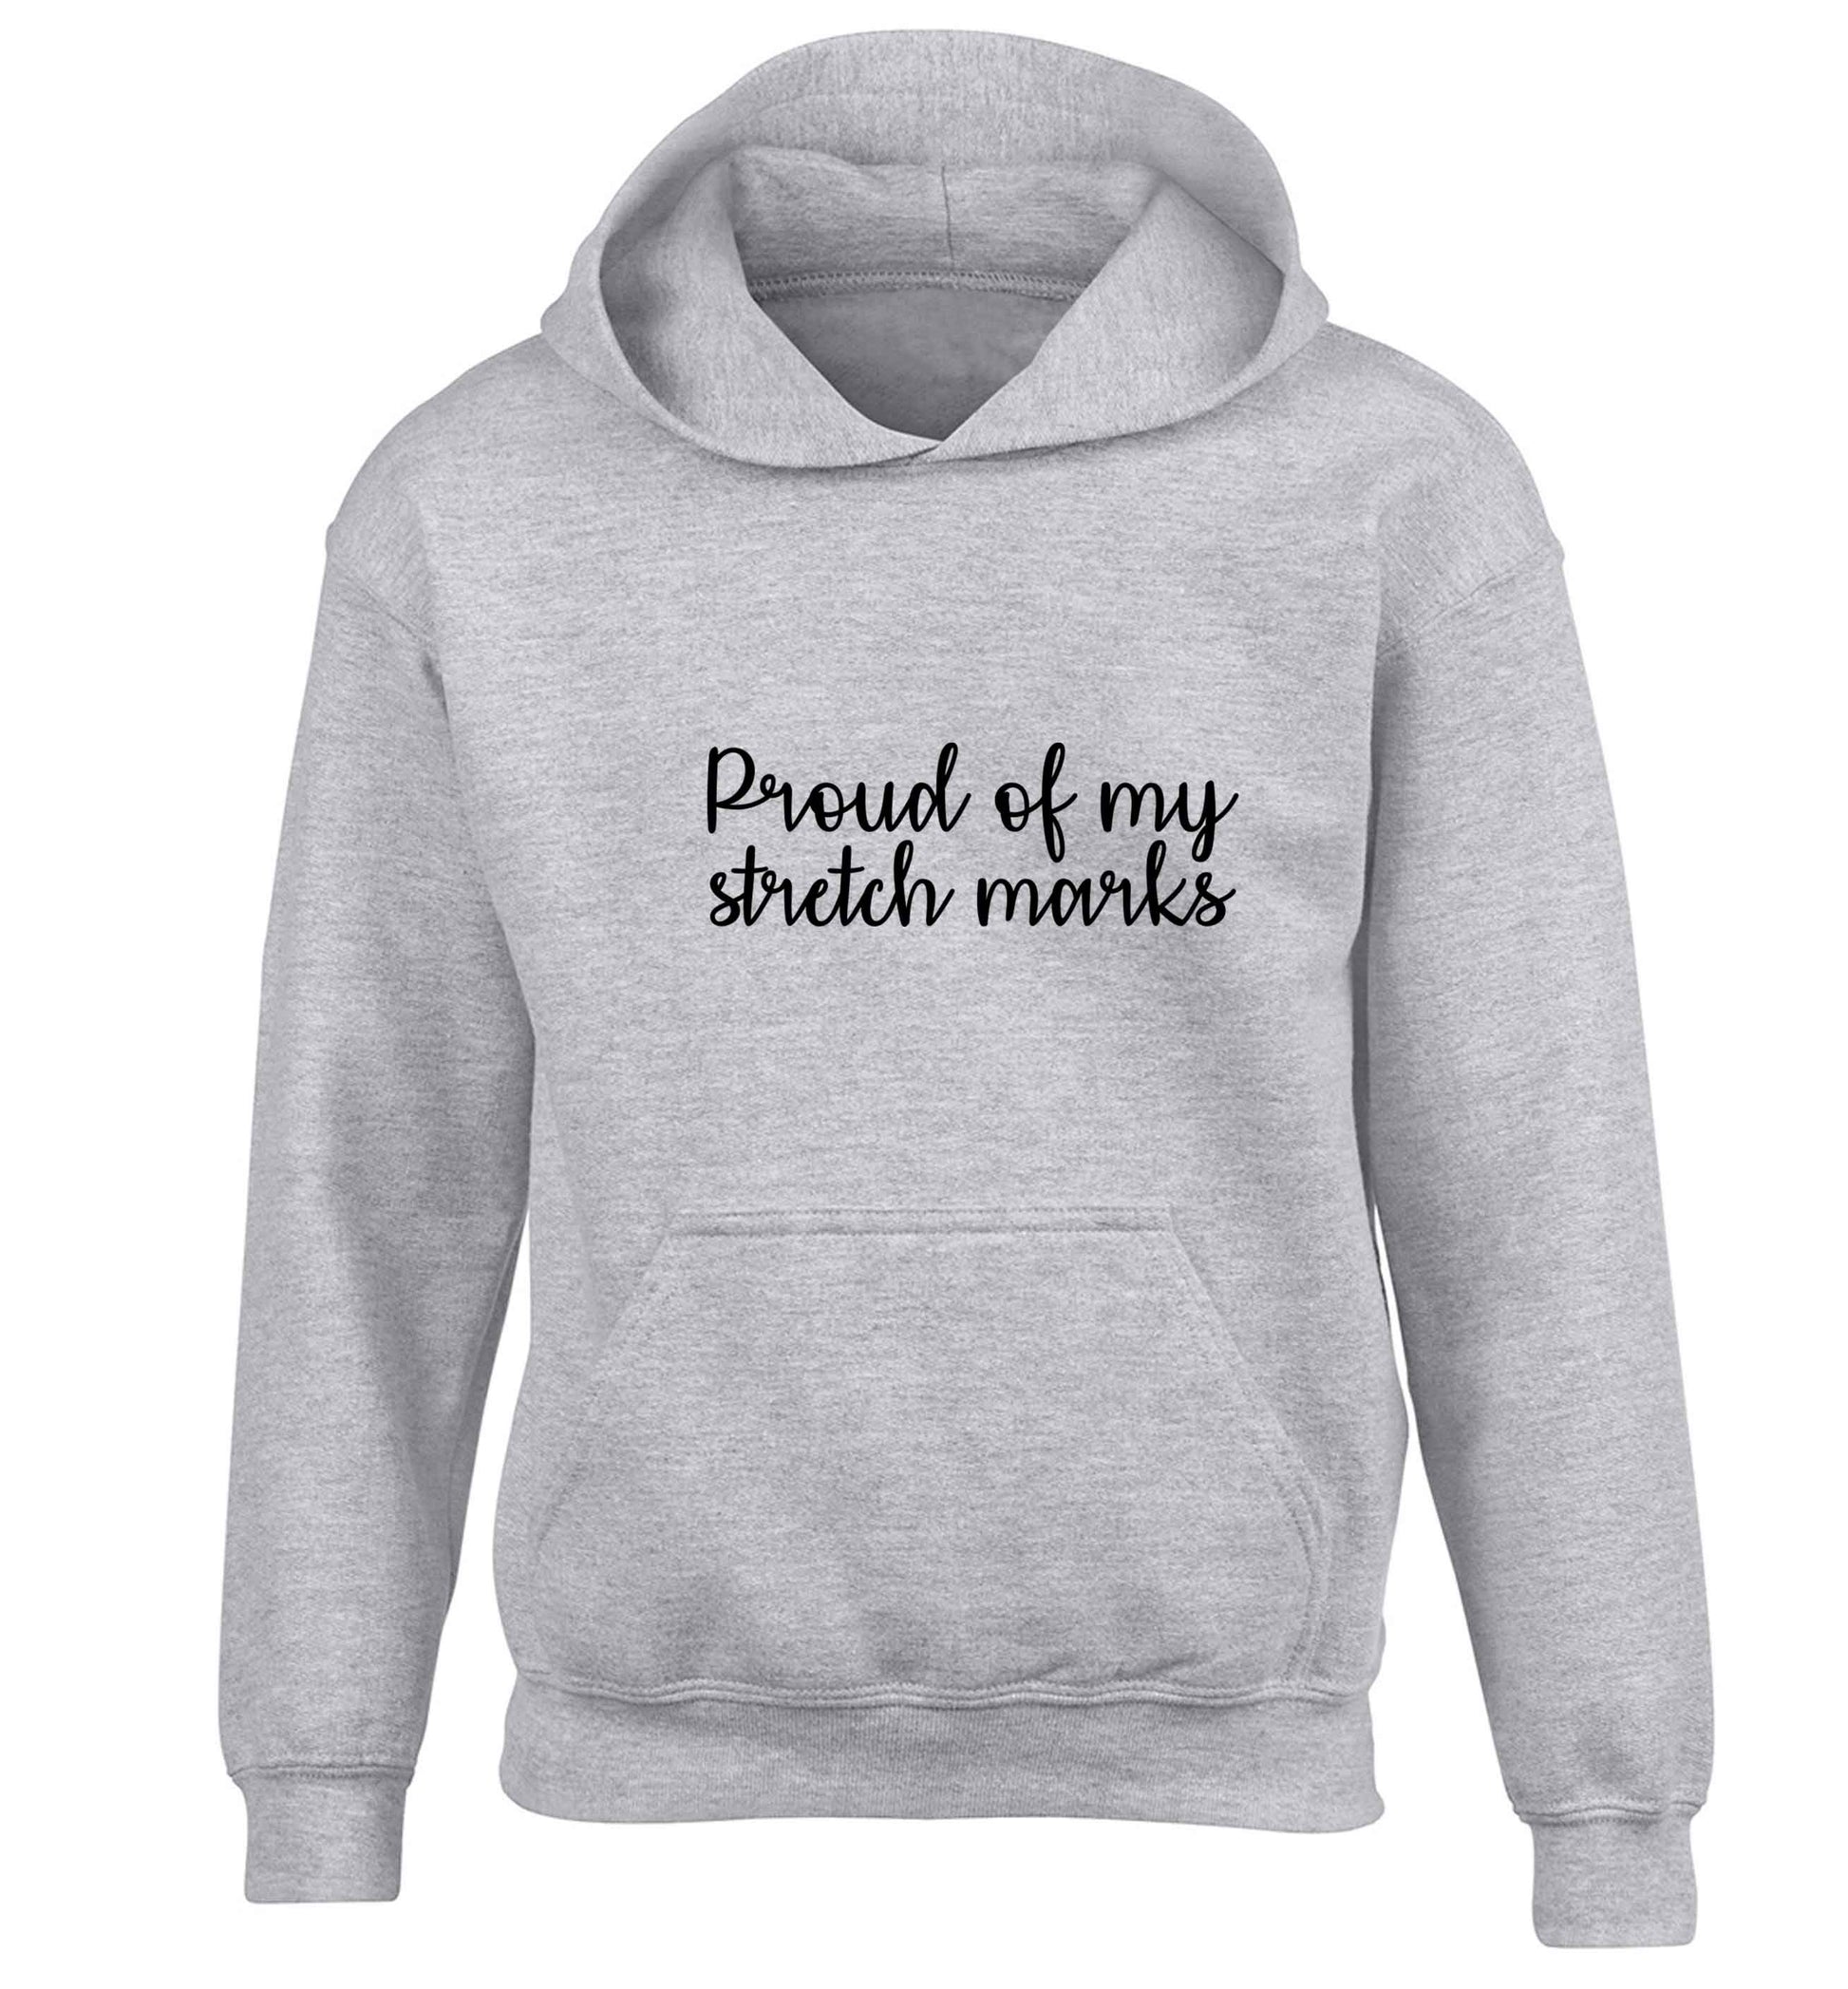 Proud of my stretch marks children's grey hoodie 12-13 Years